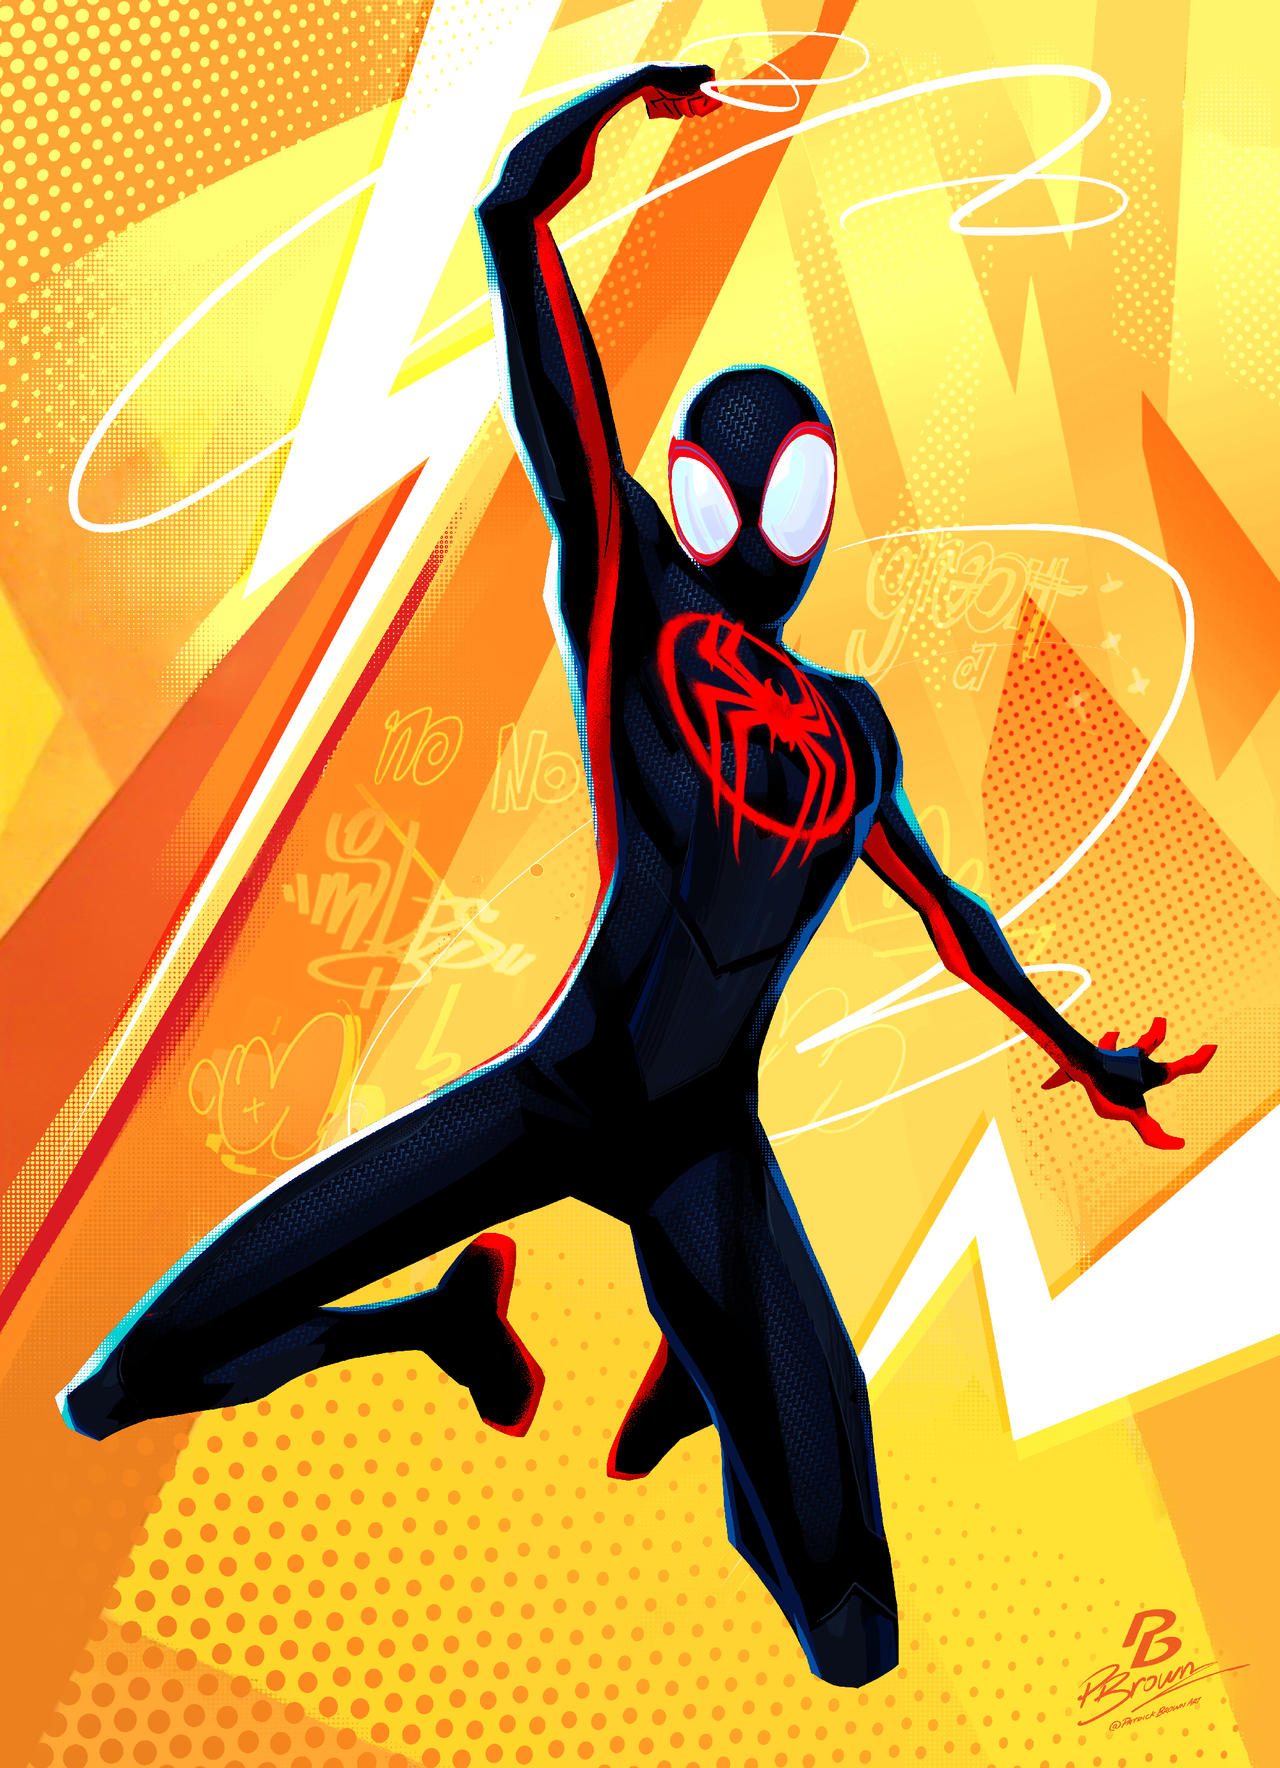 Excited to share my Spider-Man: Across the Spiderverse poster with